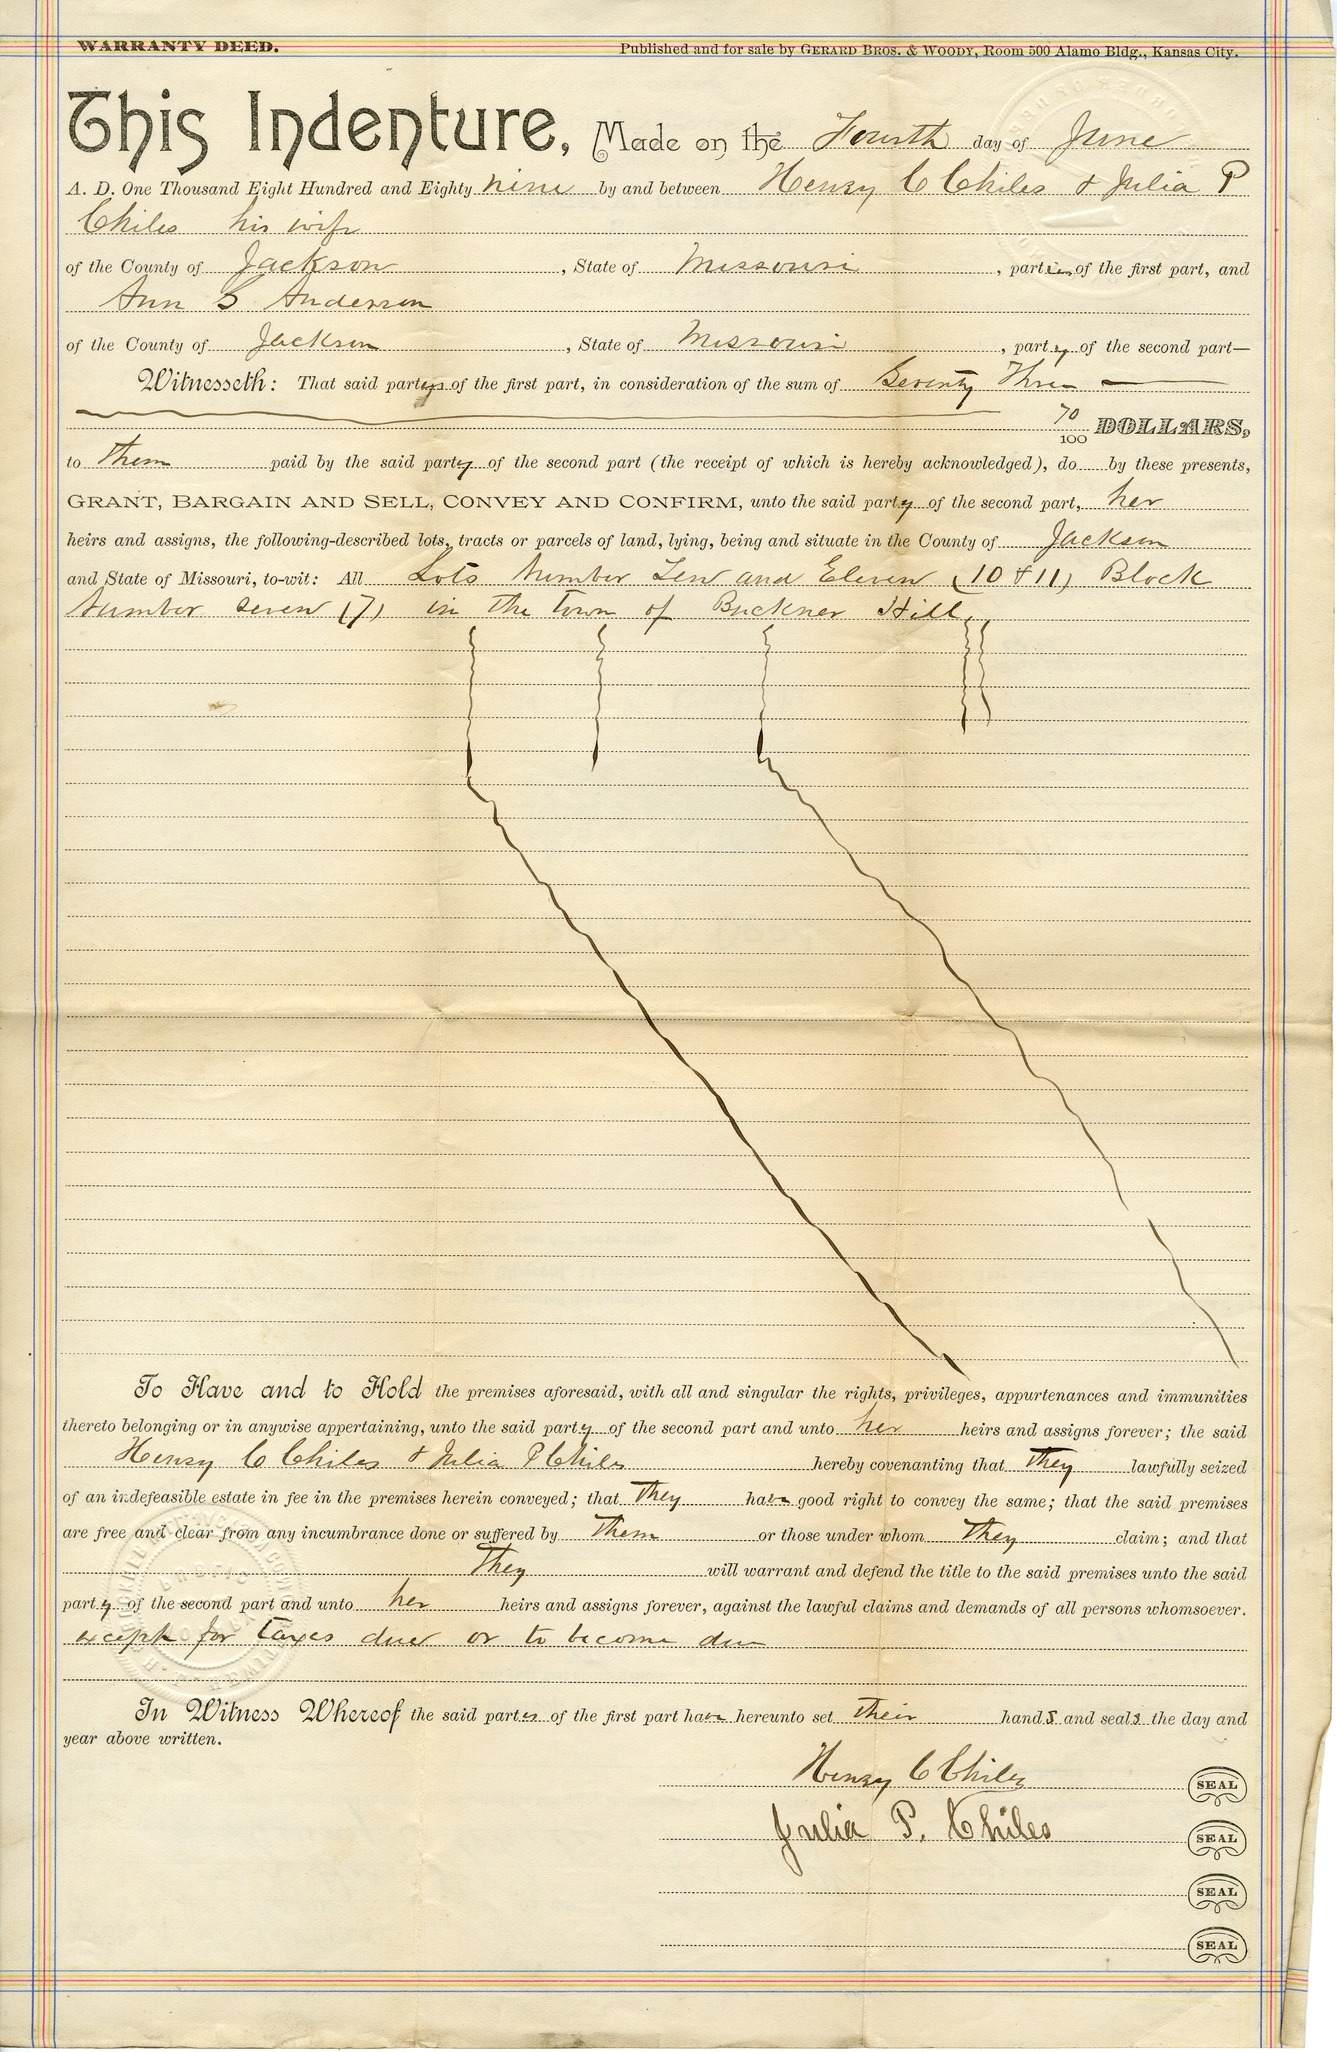 Warranty Deed from Henry C. Chiles and Julia P. Chiles to Ann S. Anderson